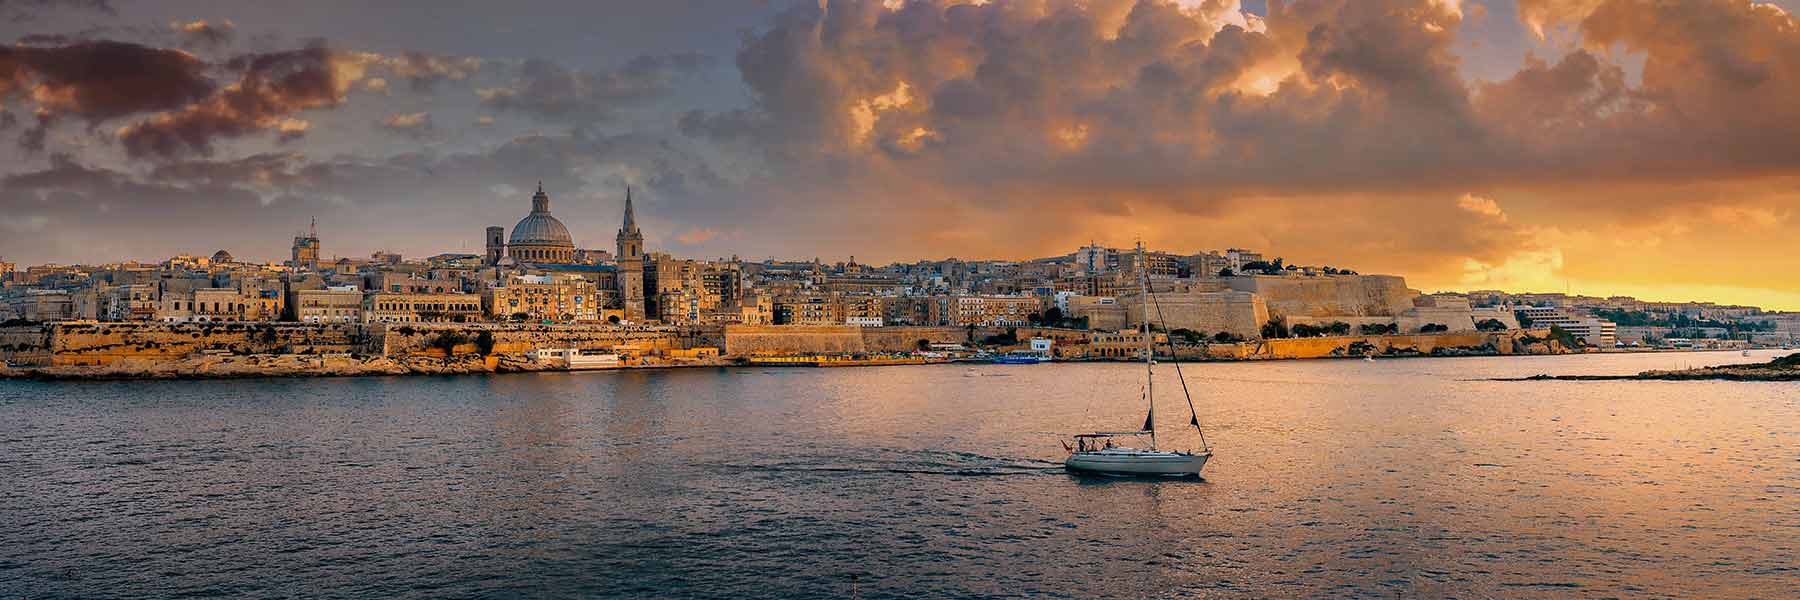 All You Need to Know about Acquiring Malta’s Citizenship